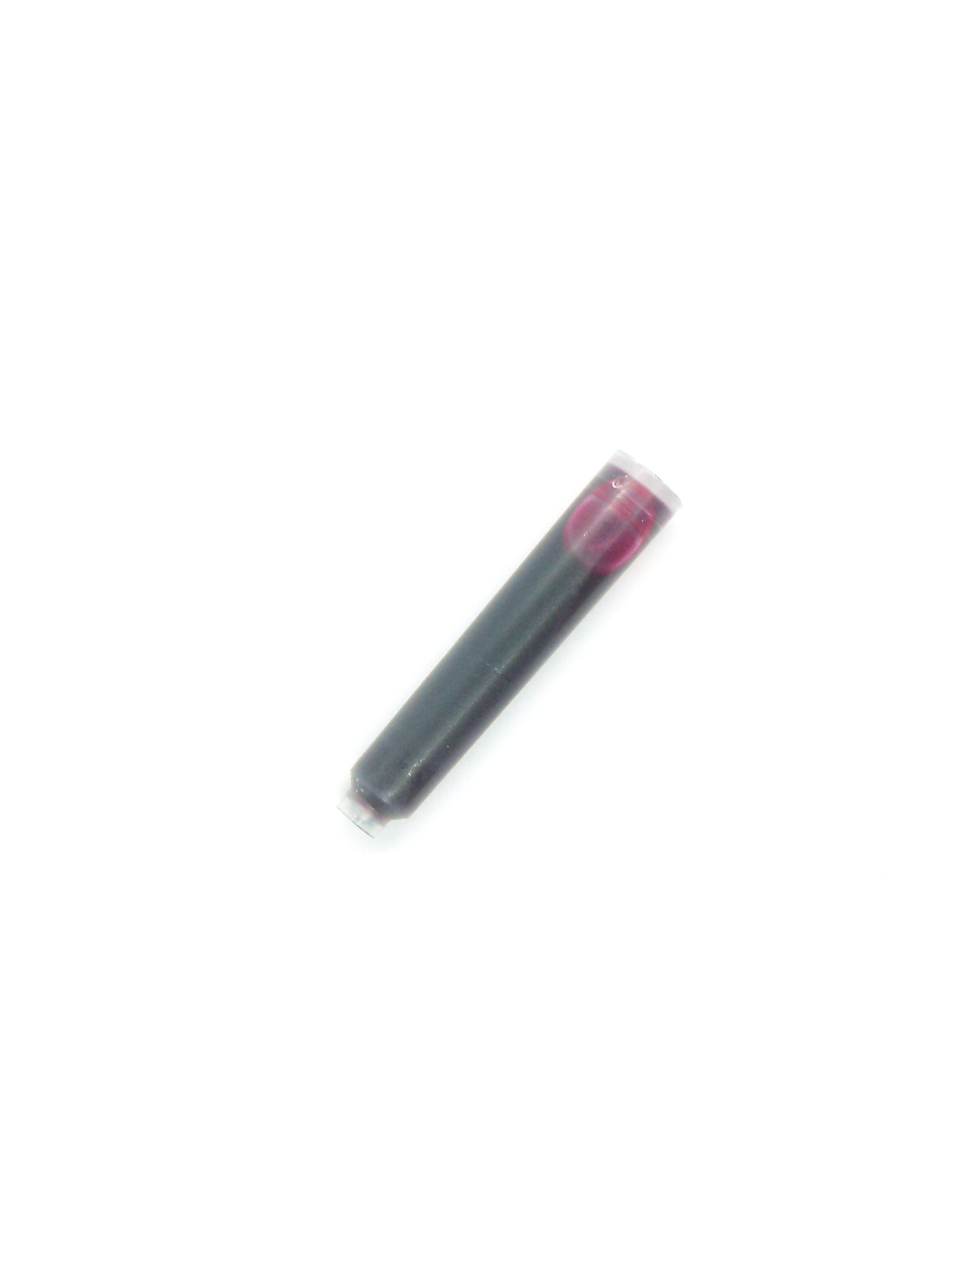 Ink Cartridges For Sizzle Stix Fountain Pens (Pink)